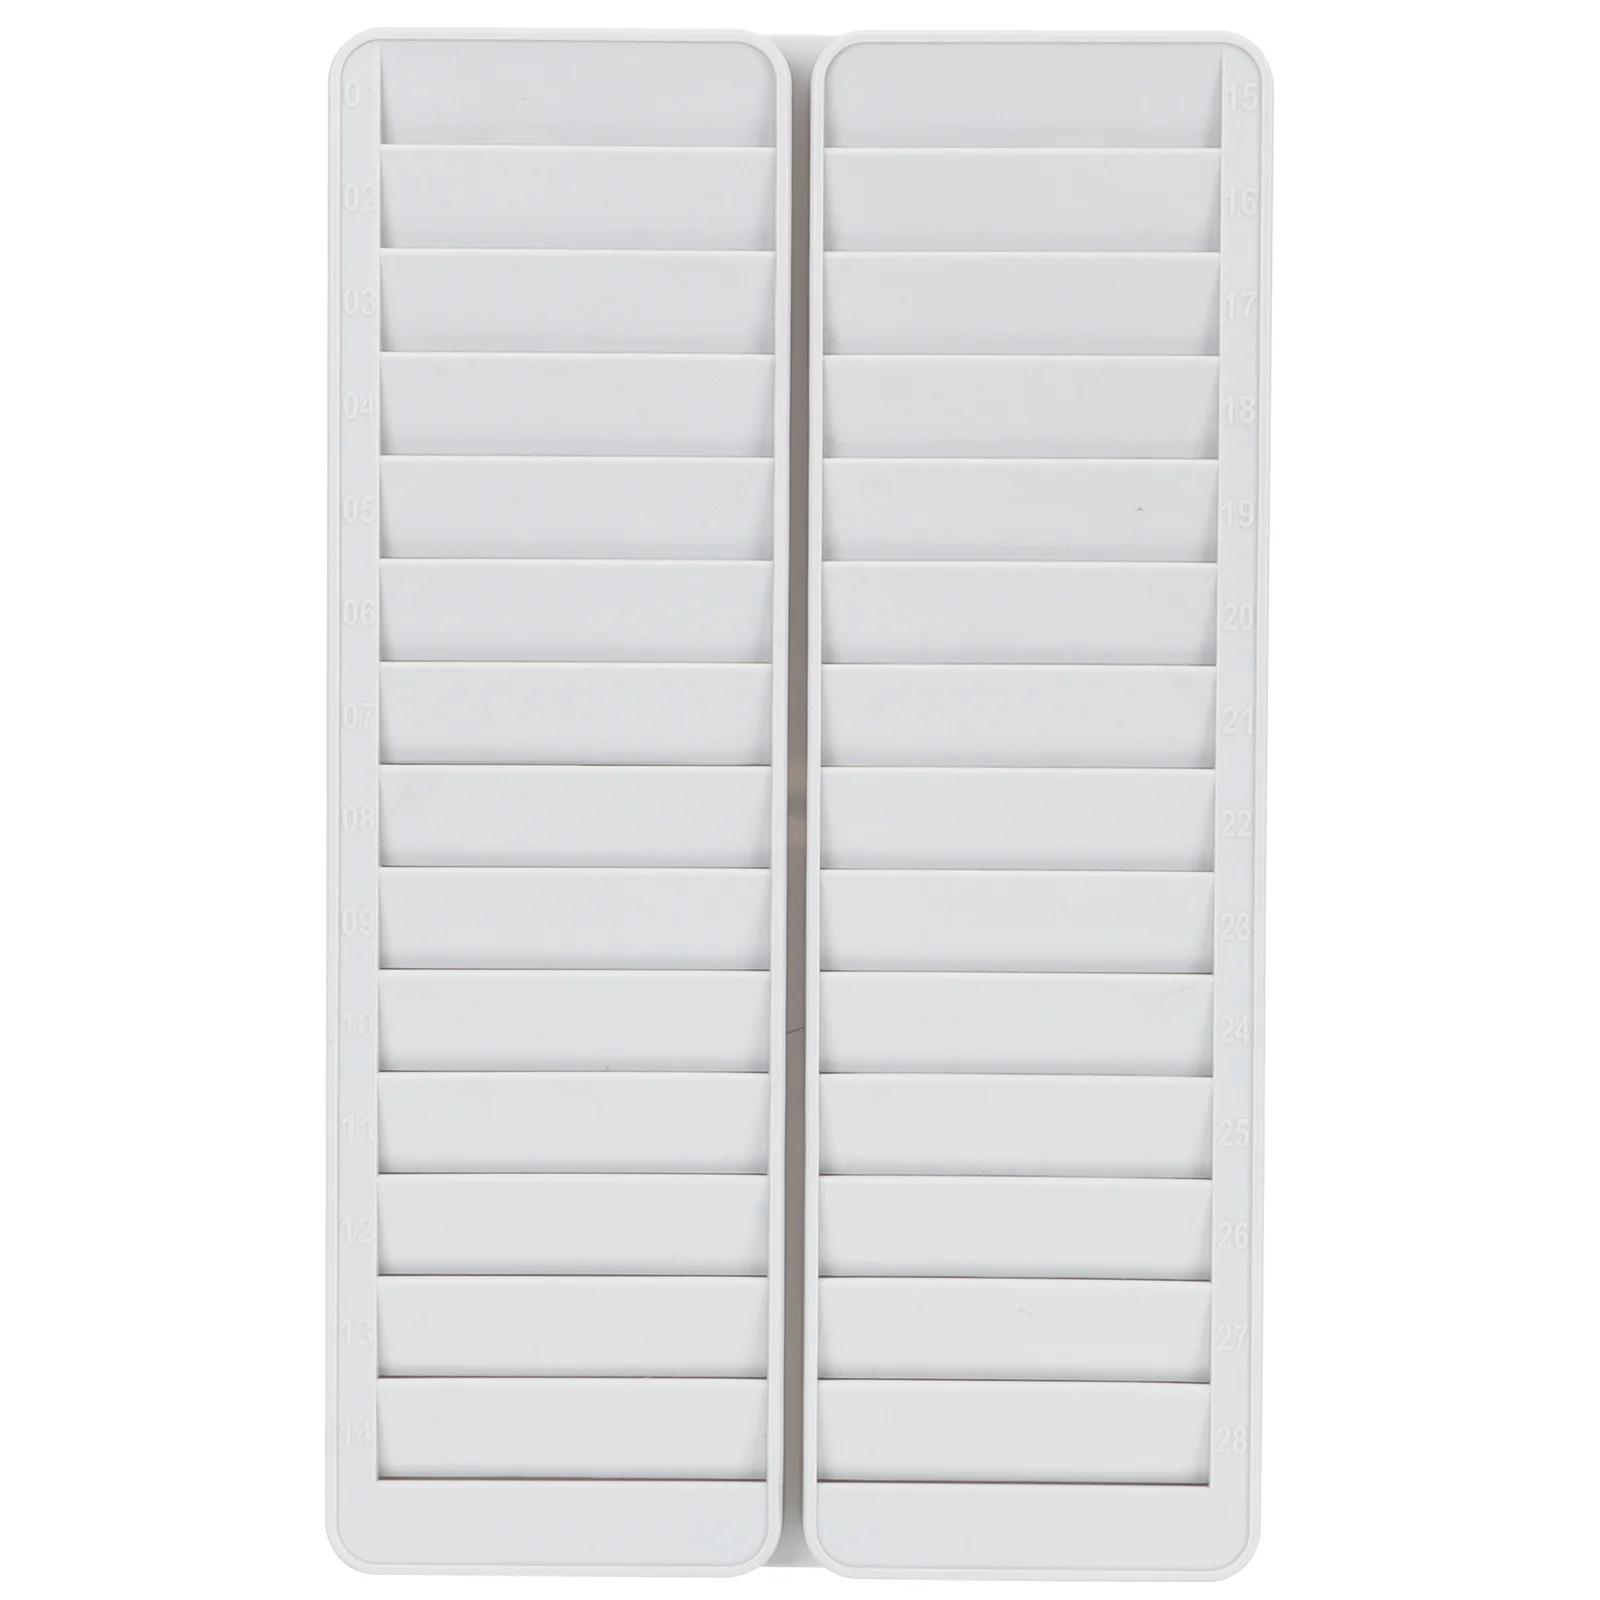 

Organizer Stand Multi-slots Cards Holder Hotel Room Cards Holder Time Cards Rack for Warehouse Hotel